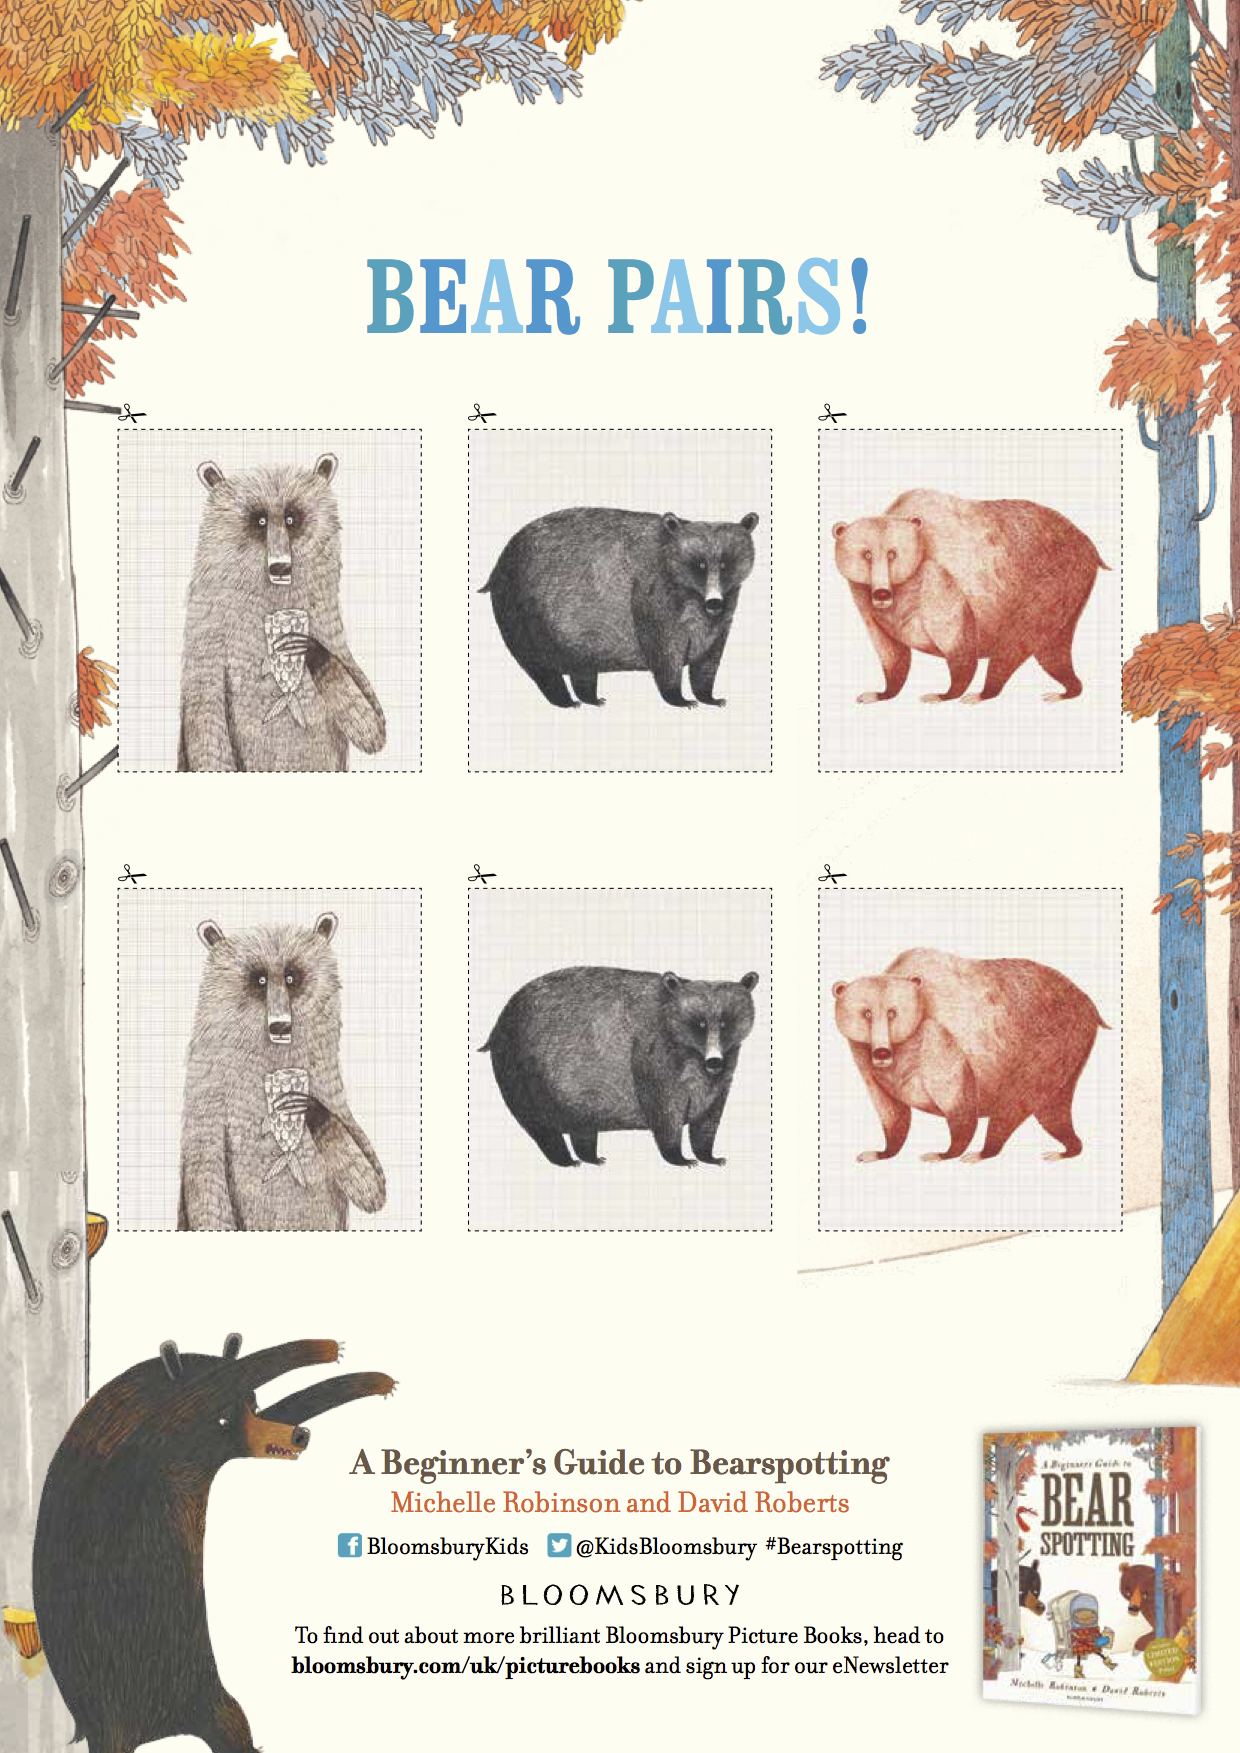 Second matching pairs activity sheet for A Beginner's Guide to Bear Spotting